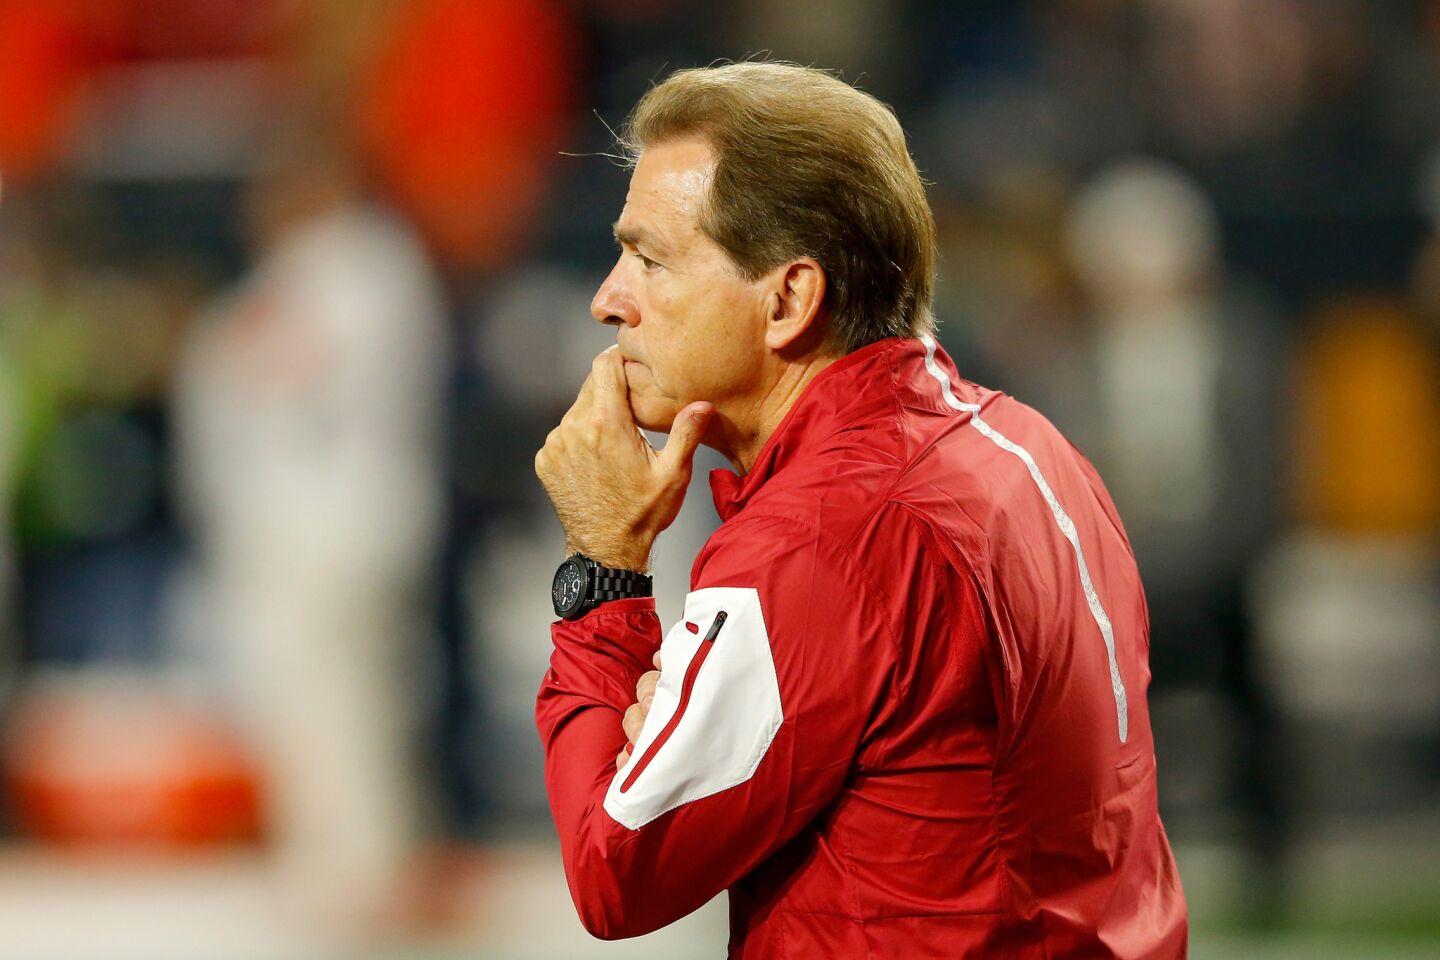 Alabama Coach Nick Saban looks on prior to the 2016 College Football Playoff championship game against the Tigers.